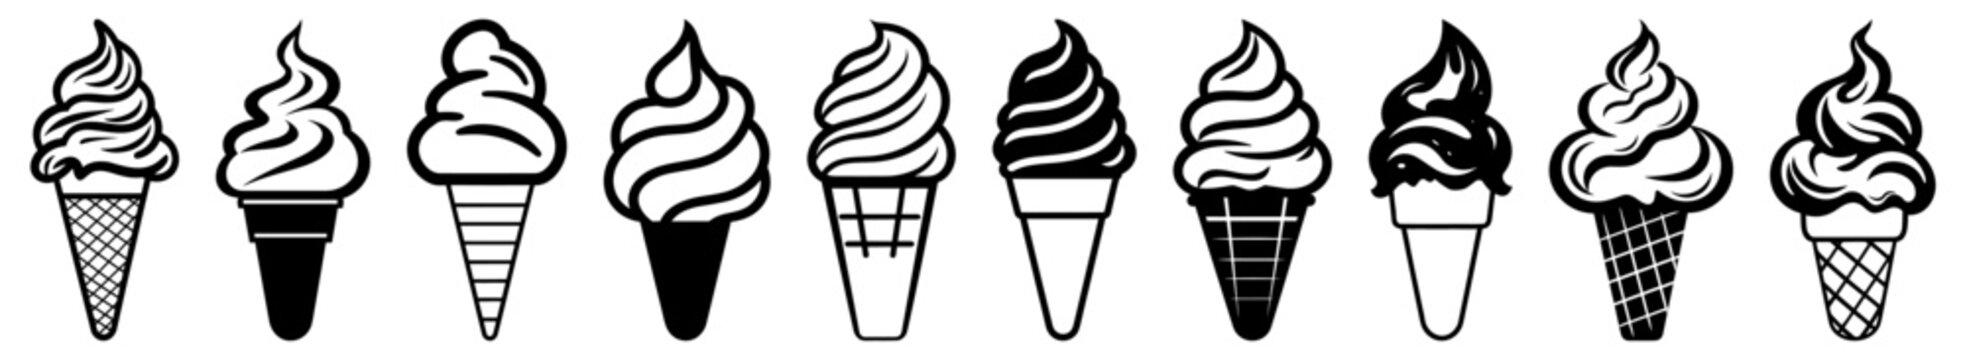 Soft ice cream cones vector silhouettes collection